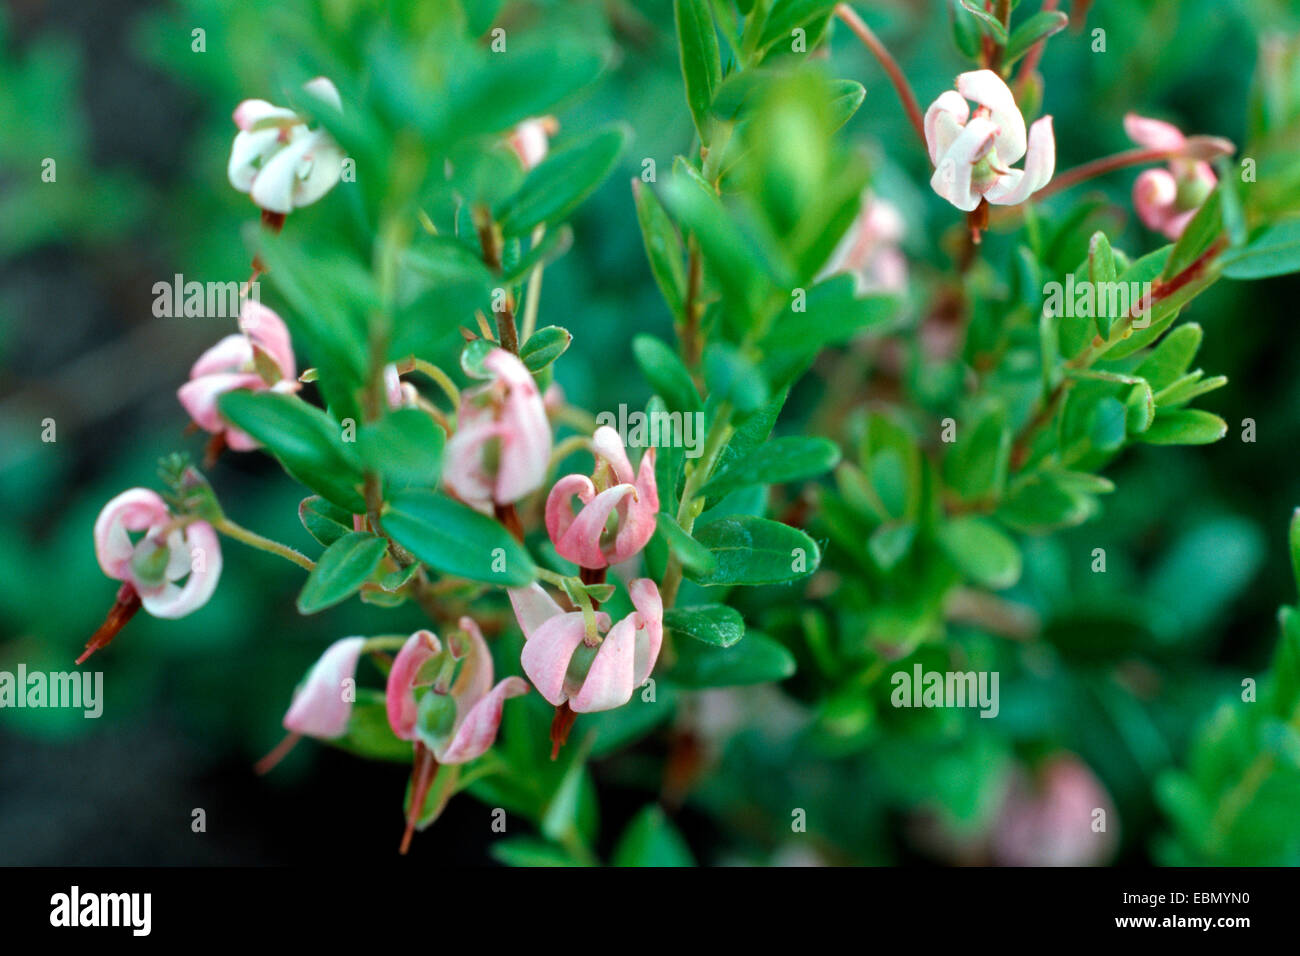 American cranberry, cultivated cranberry, large cranberry (Vaccinium macrocarpon), blooming plant Stock Photo